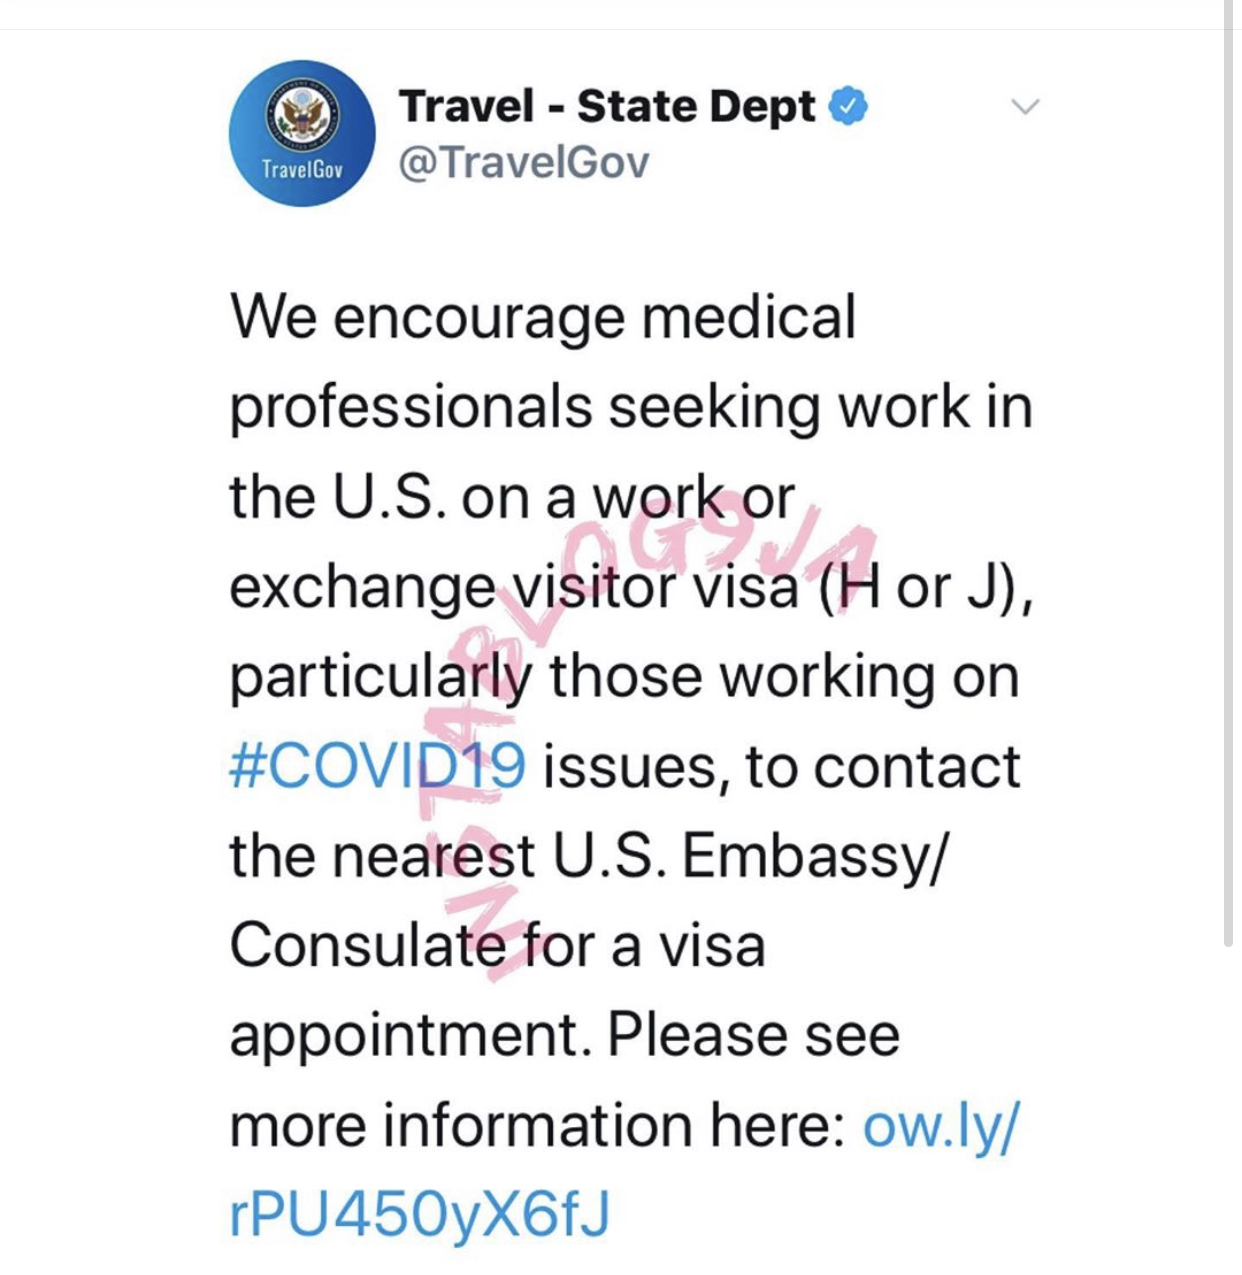 The tweet by the Bureau of Consular Affairs